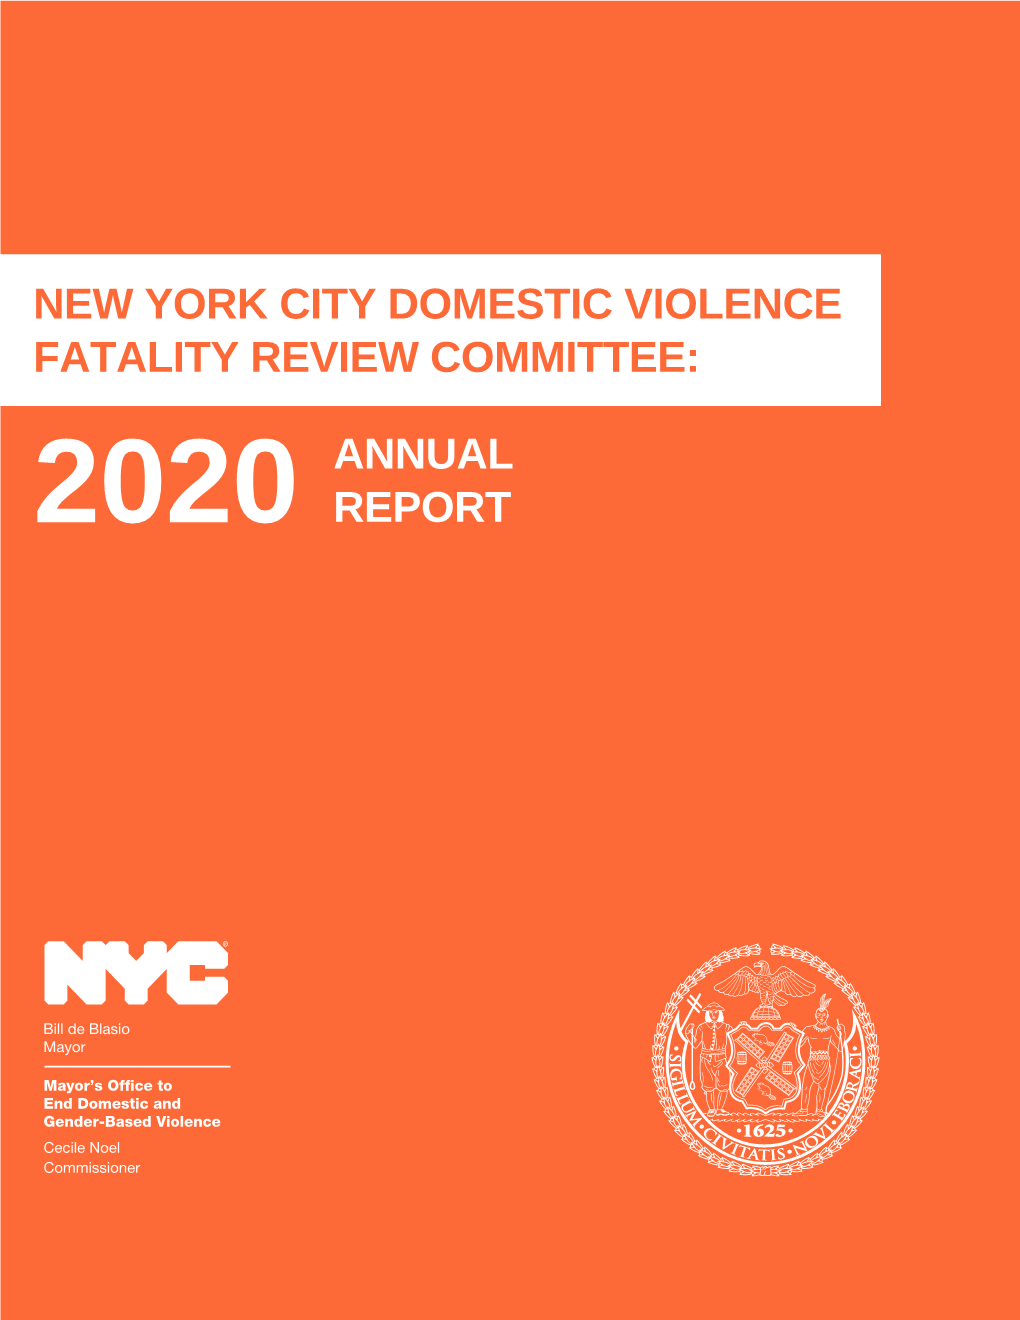 New York City Domestic Violence Fatality Review Committee